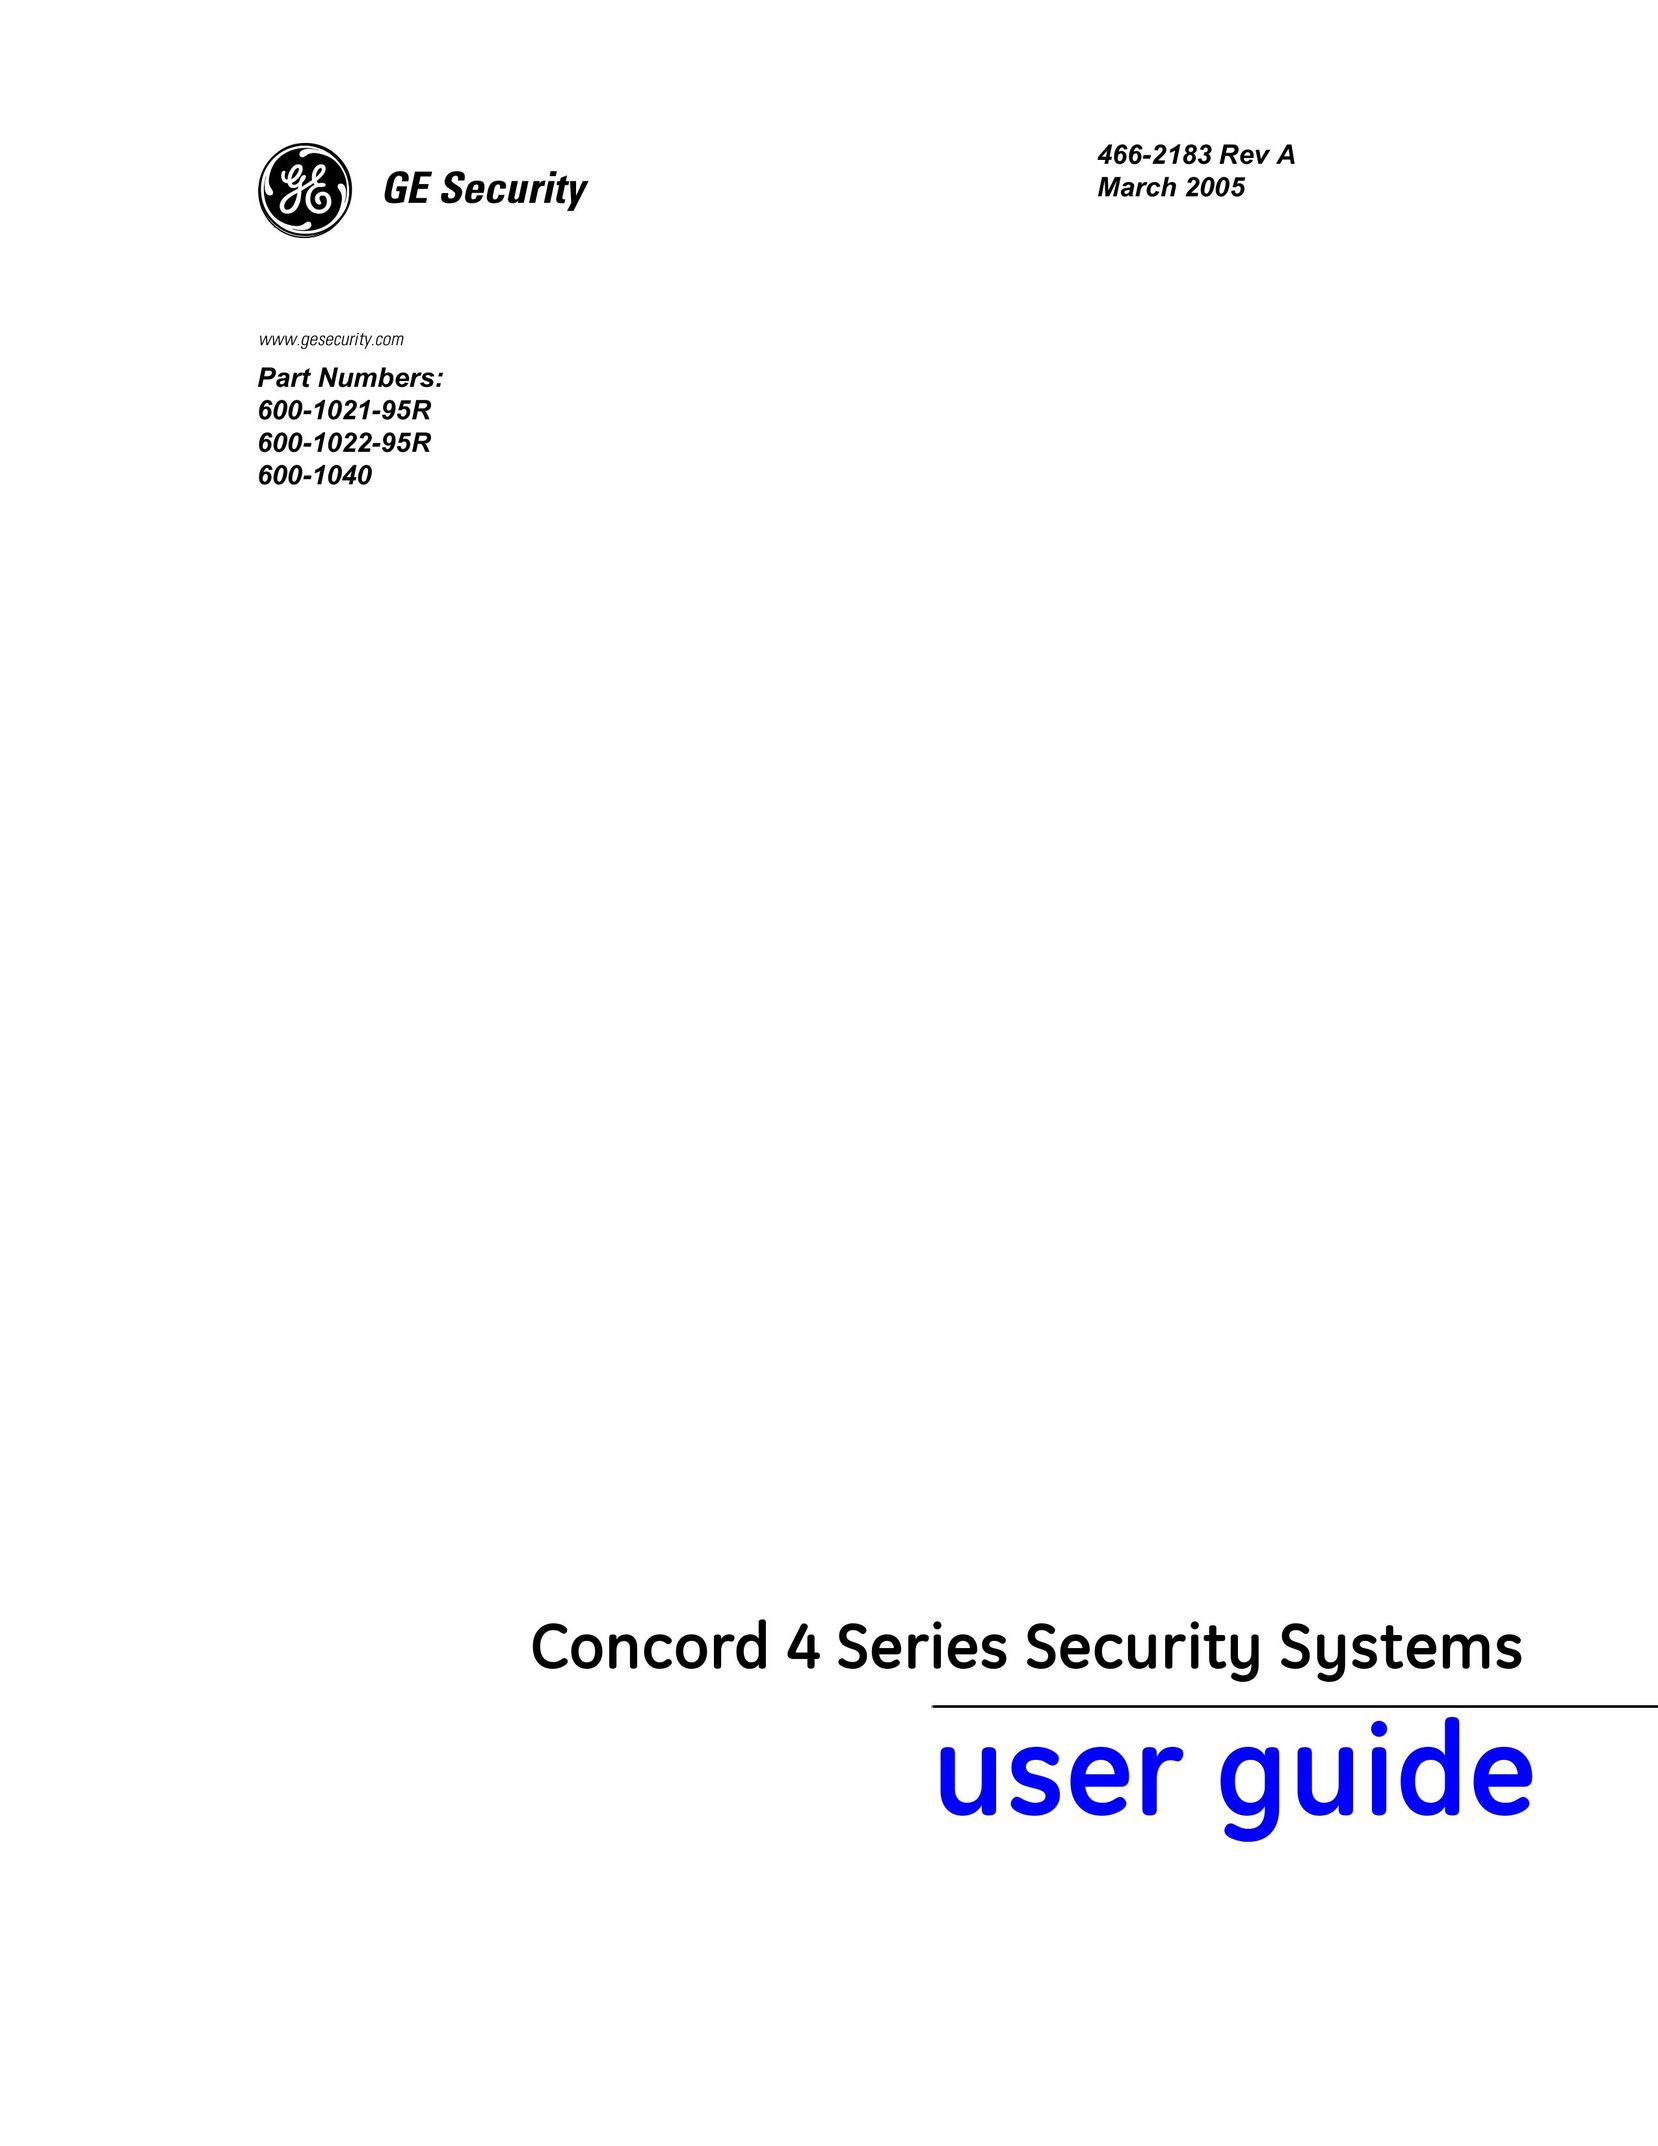 GE Concord 4 Home Security System User Manual